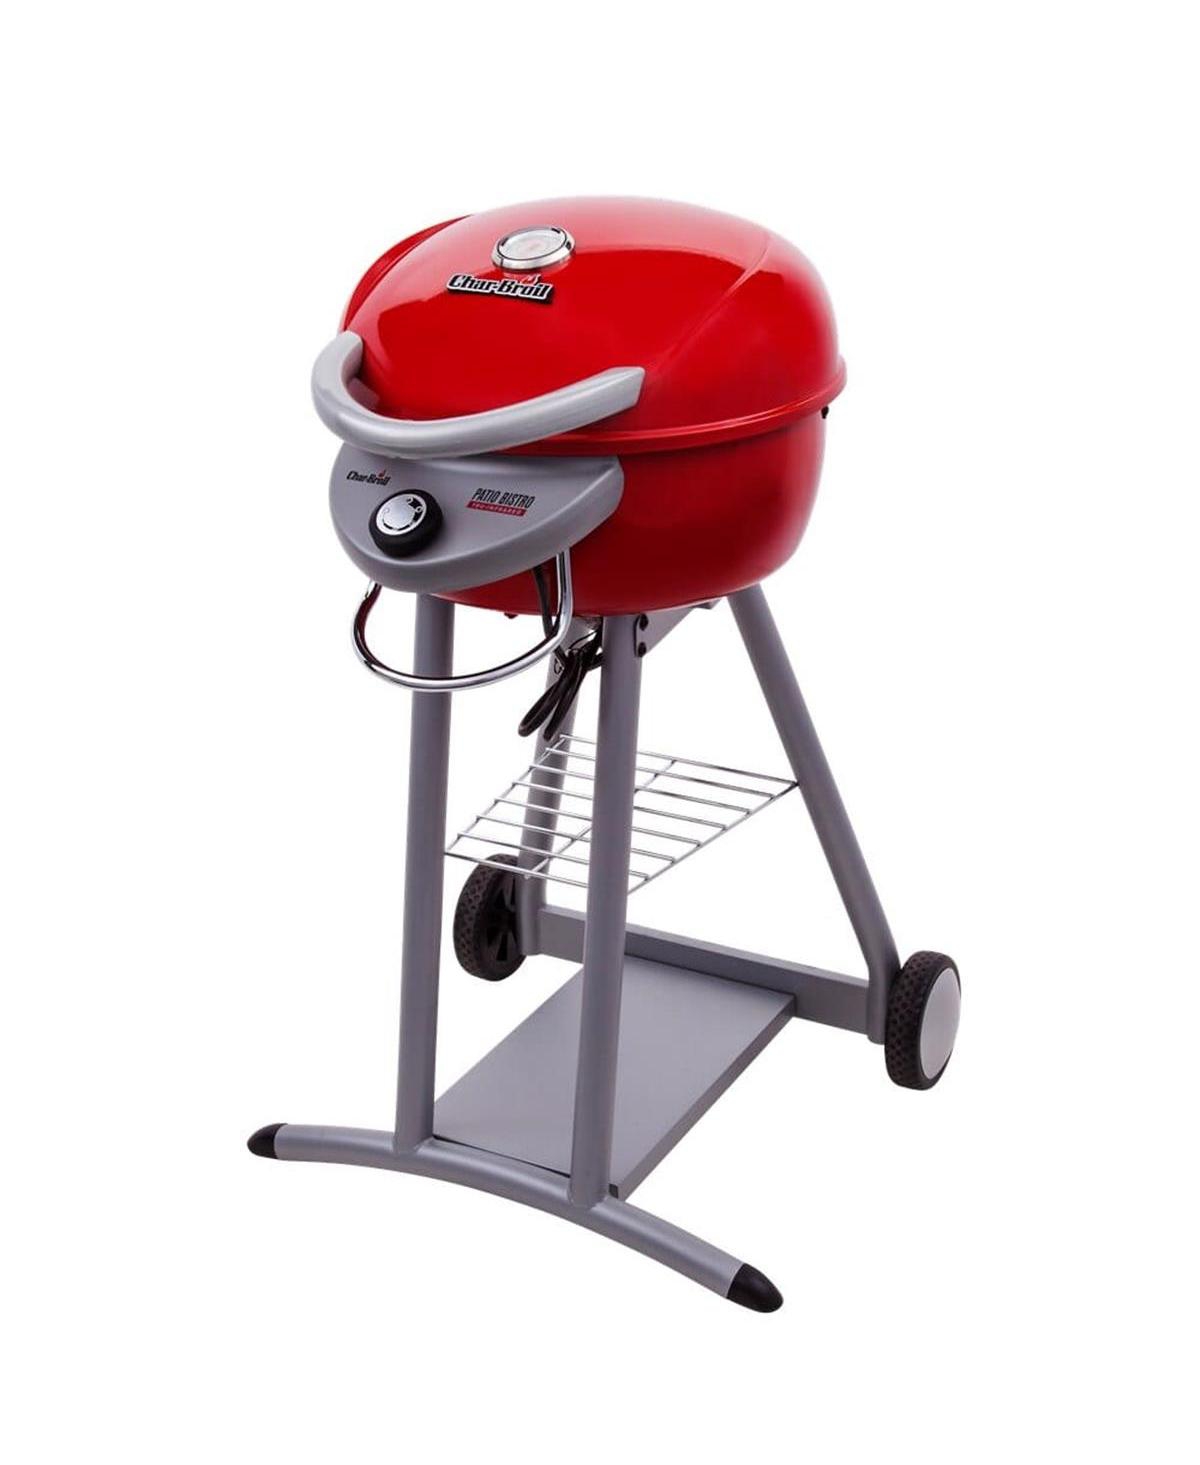 Patio Bistro Electric Grill - Red